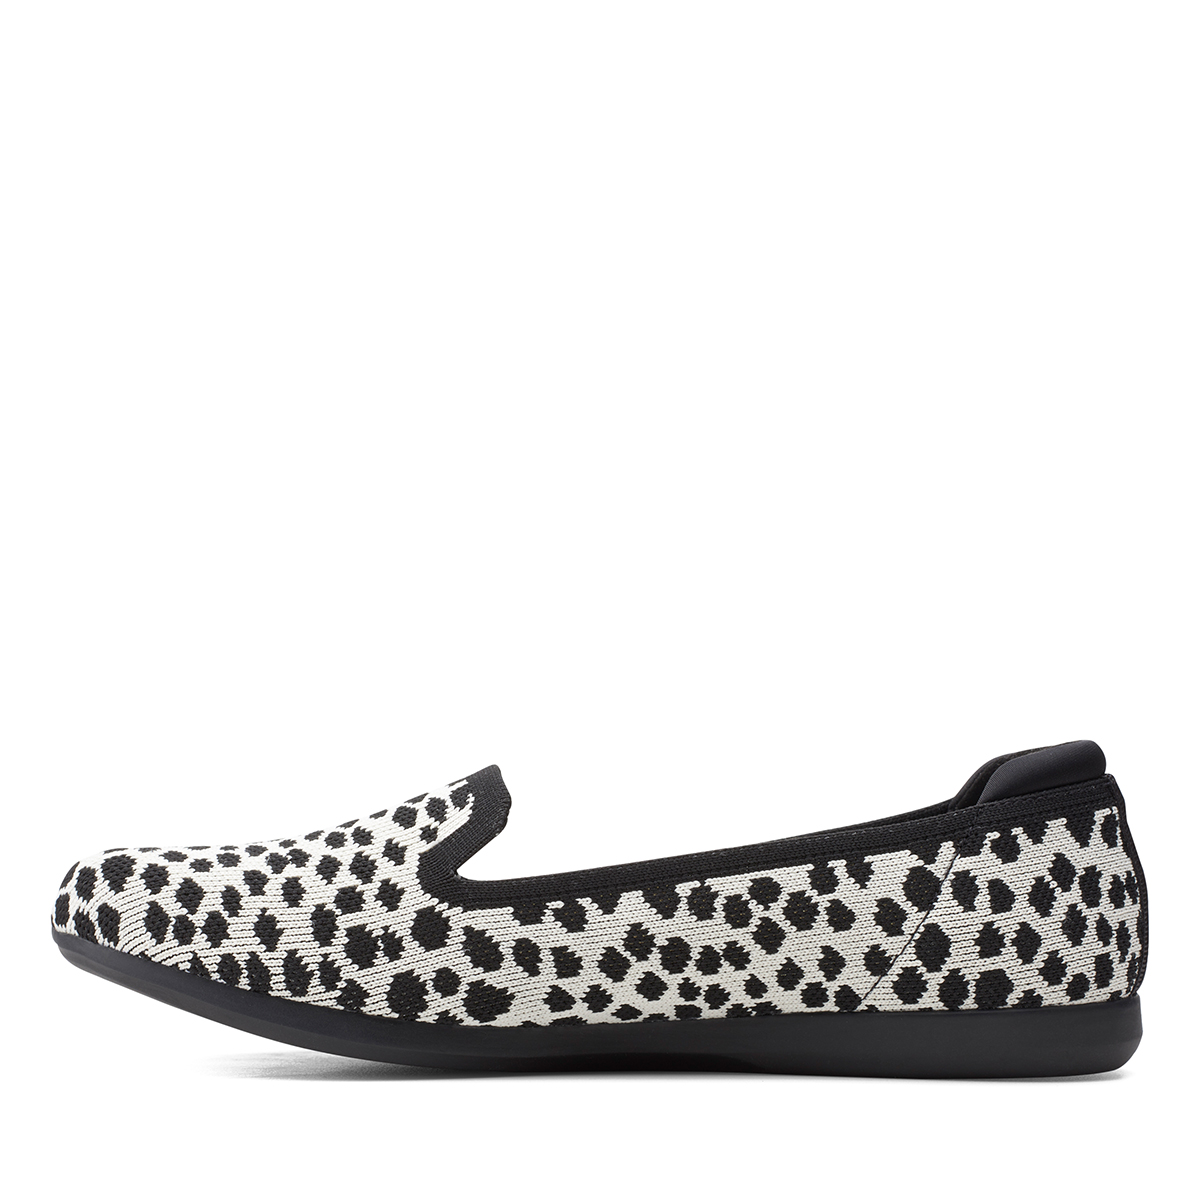 Womens Clarks(R) Cloudsteppers(tm) Carly Dream Dotted Loafers